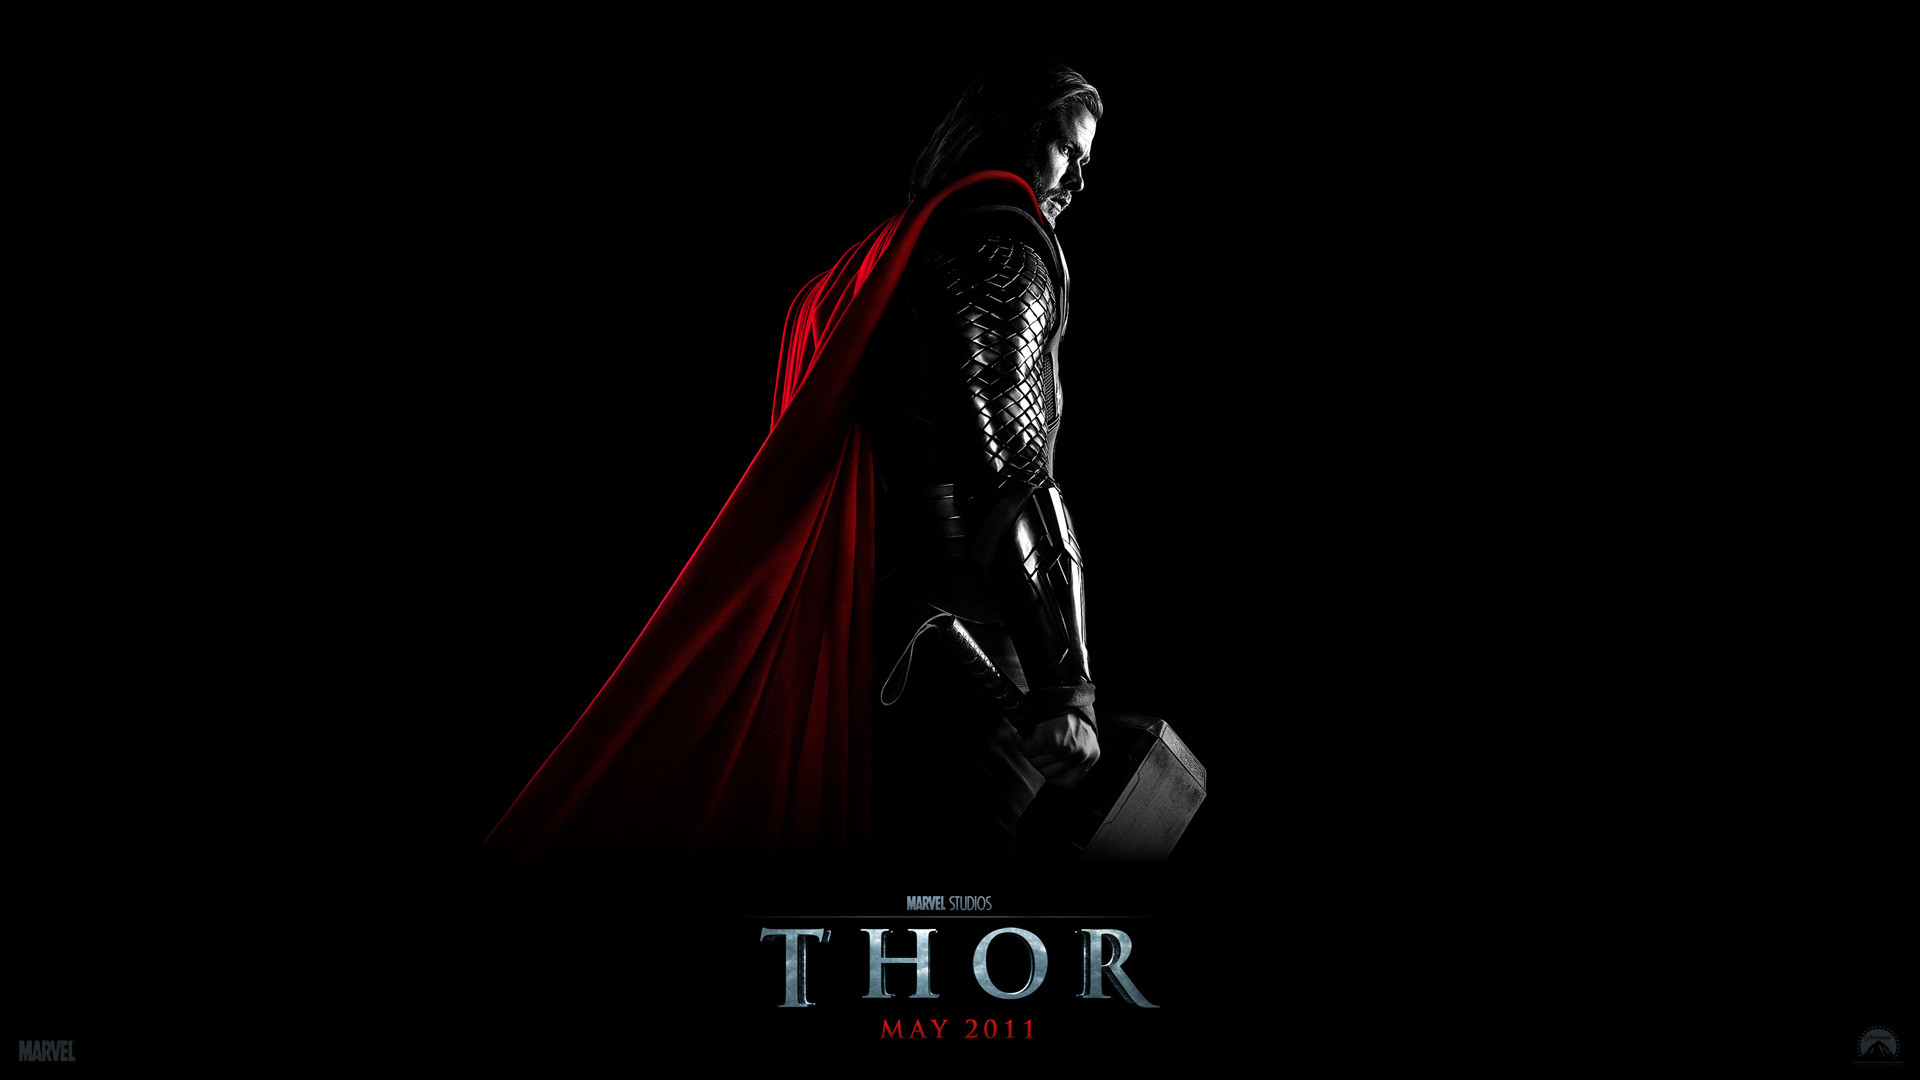 1920x1080 Thor from the Marvel Studios movie Thor wallpaper